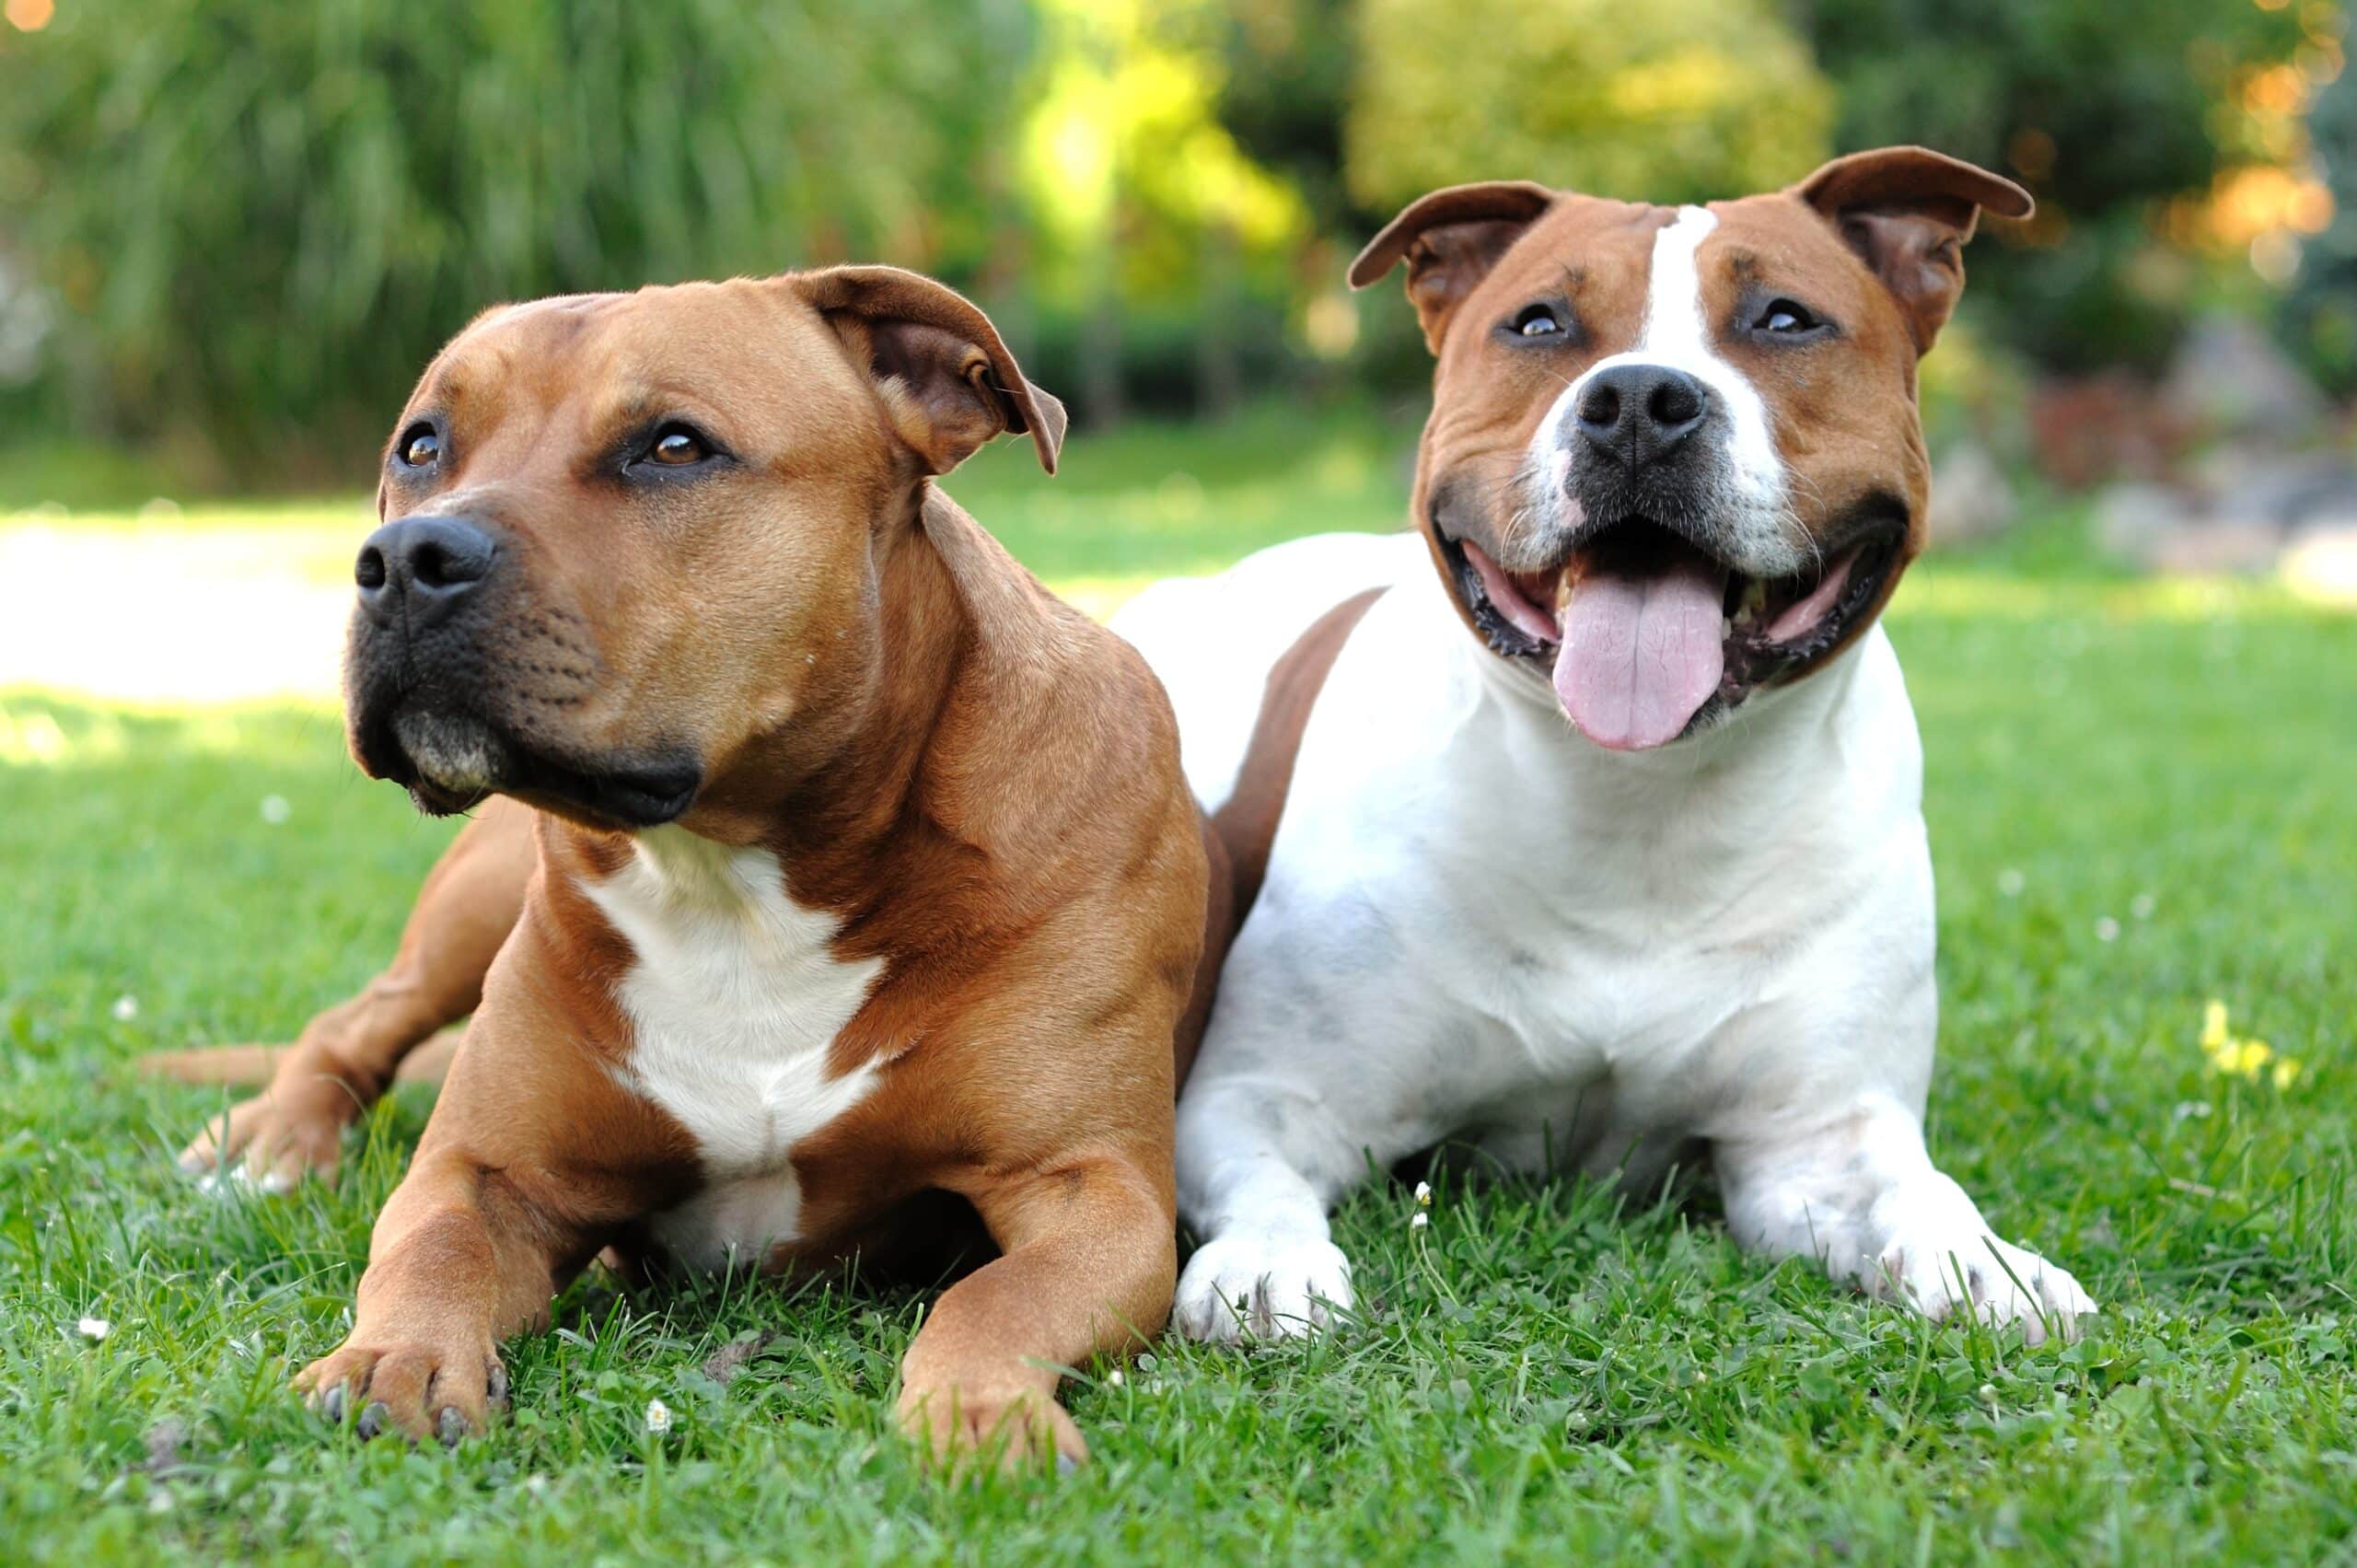 American Staffordshire Terrie dogs